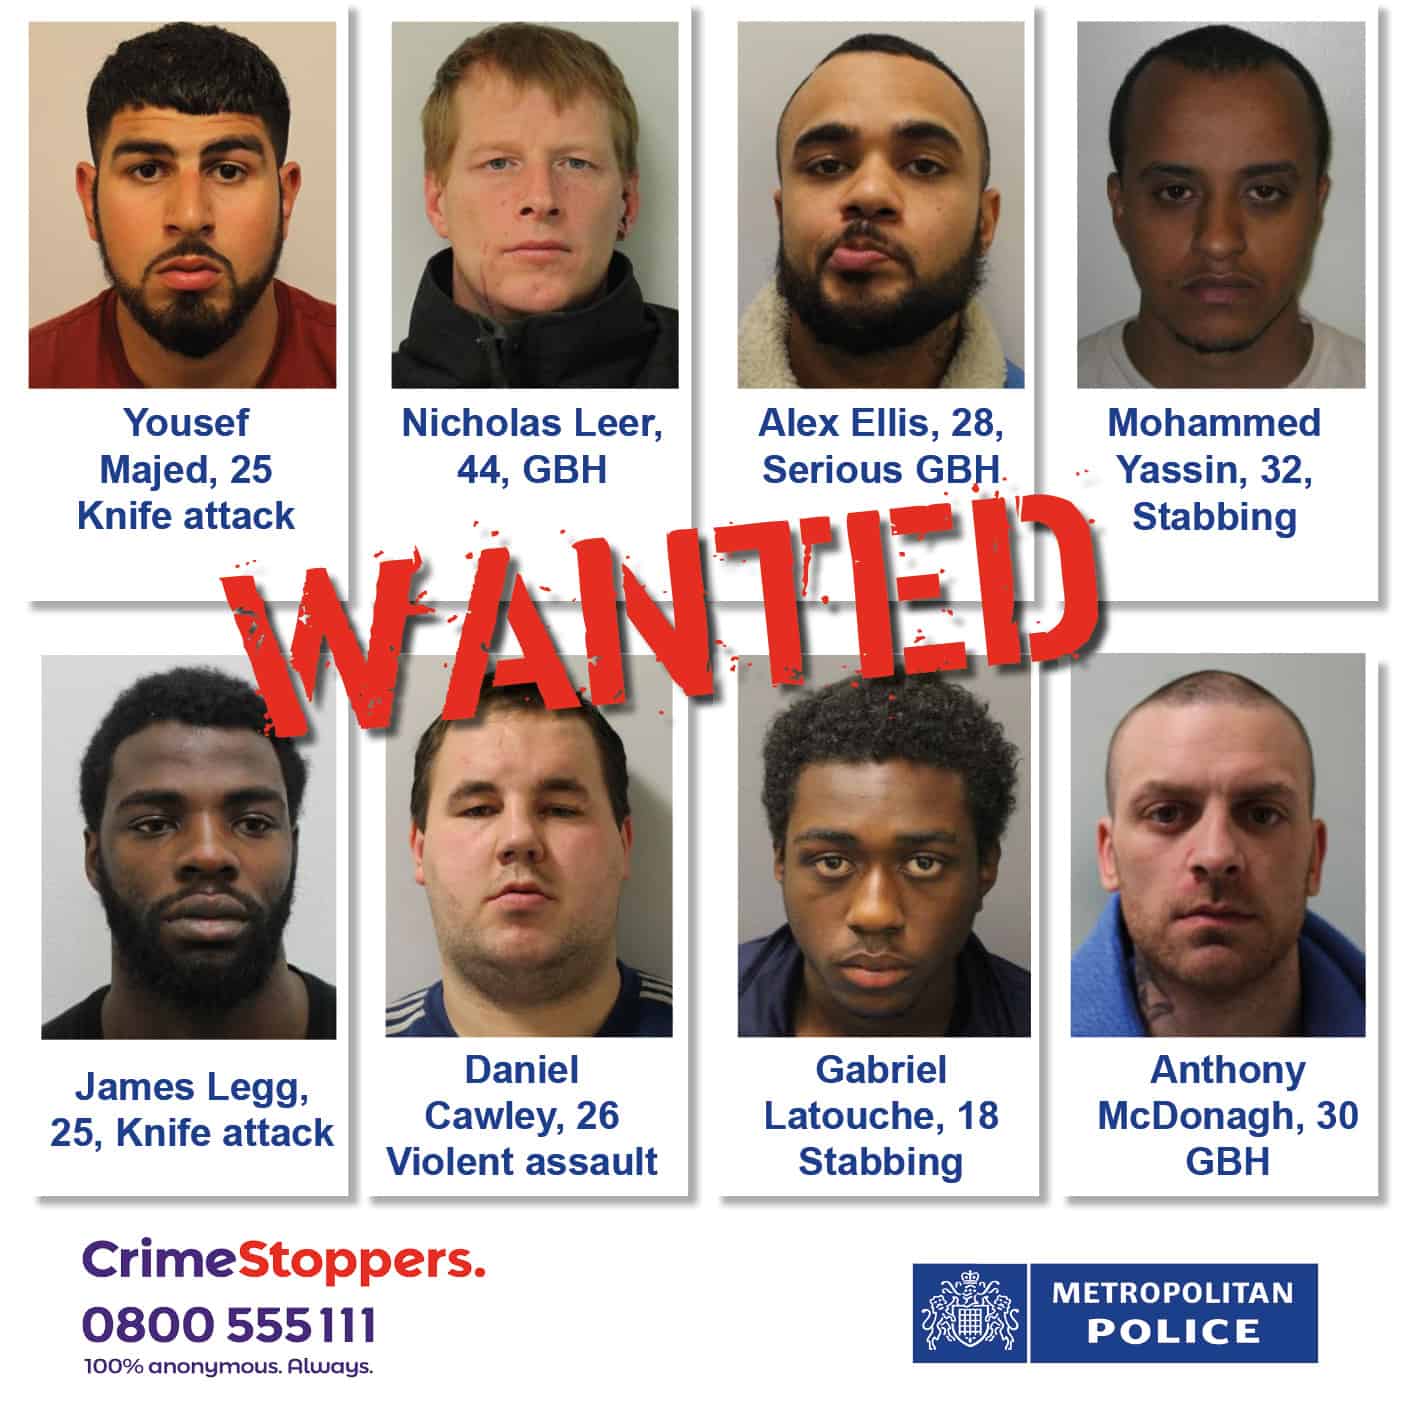 Anthony McDonagh, (bottom right) believed to be in the SE15 area is among London's most wanted after allegedly gouging a man's eyes until he was partially blind